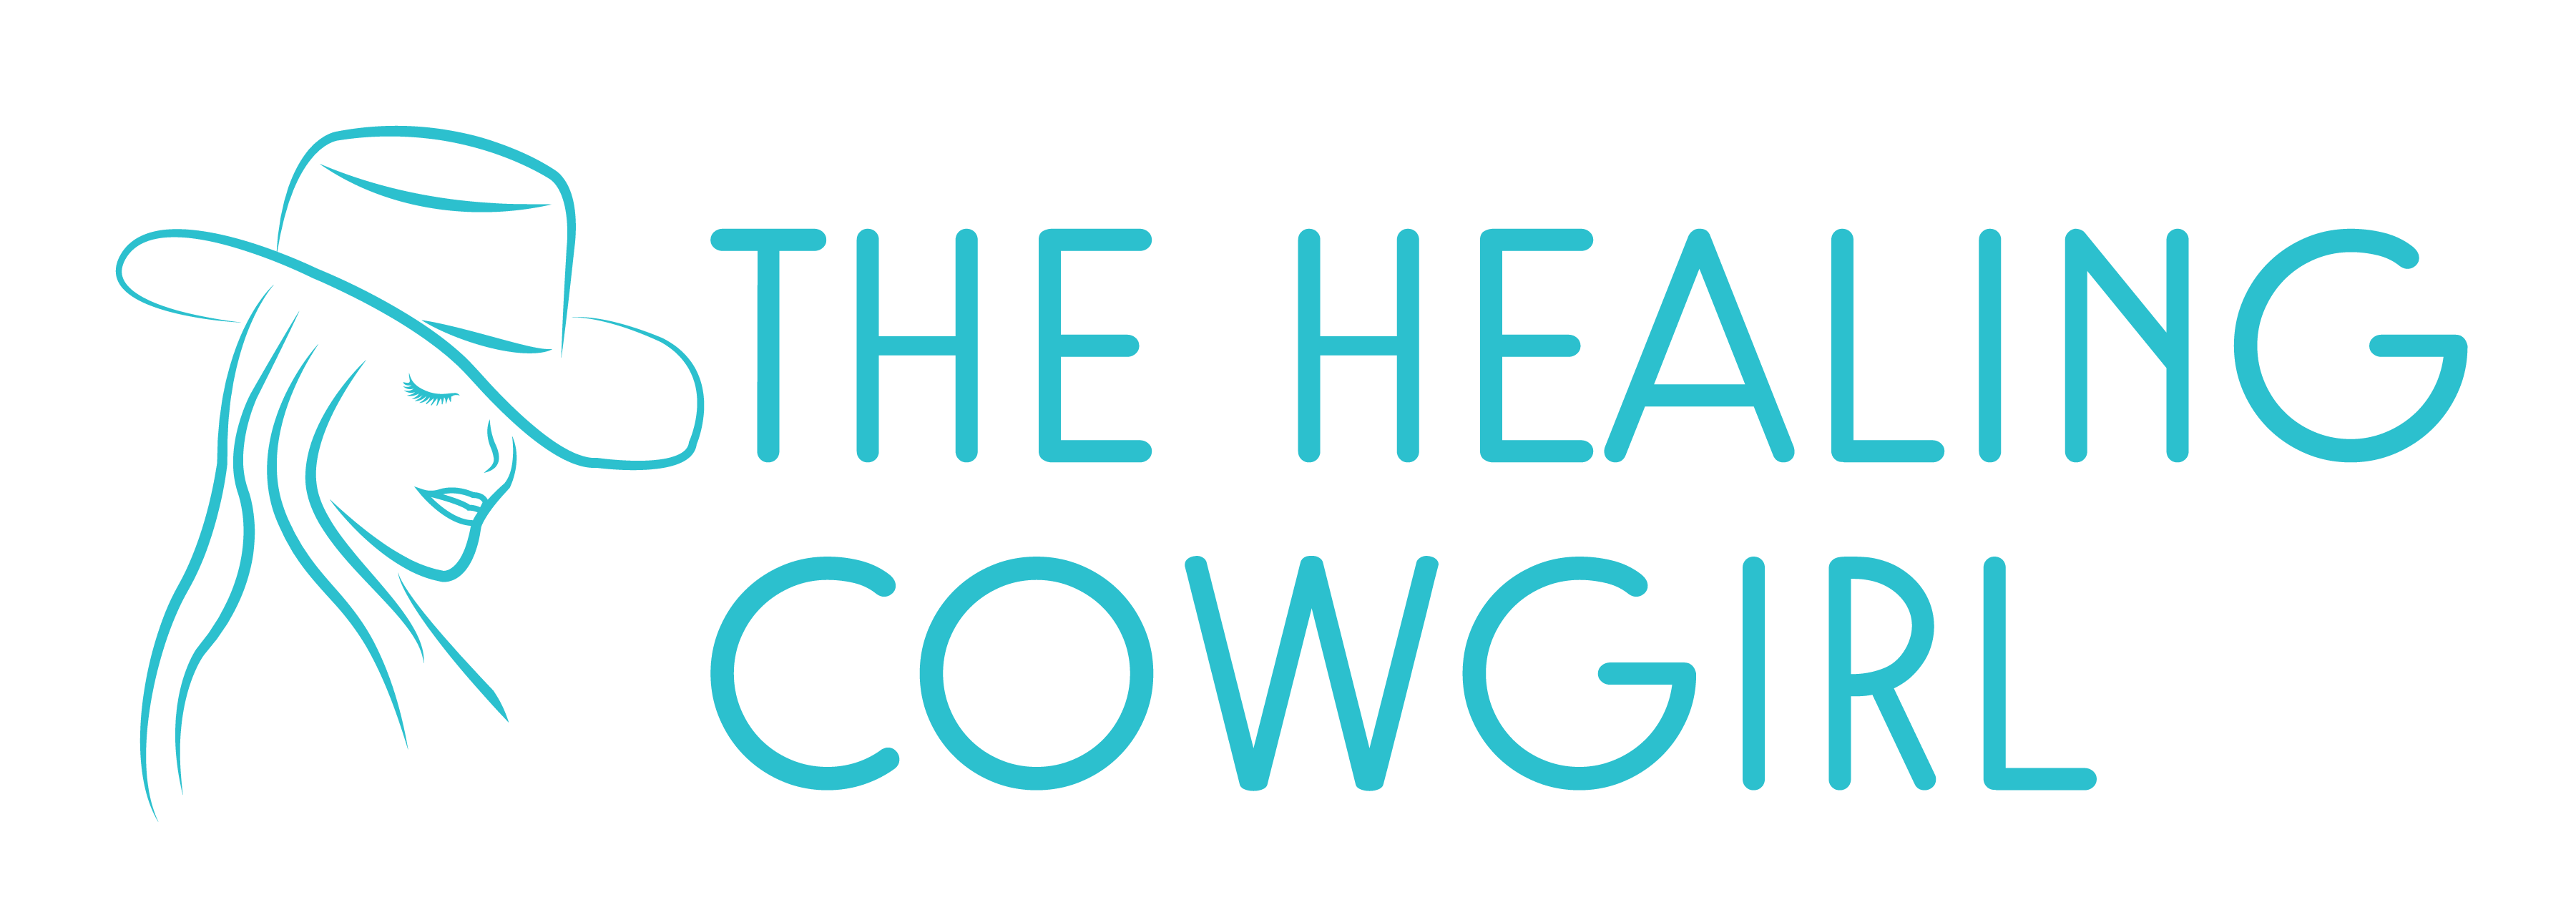 The Healing Cowgirl